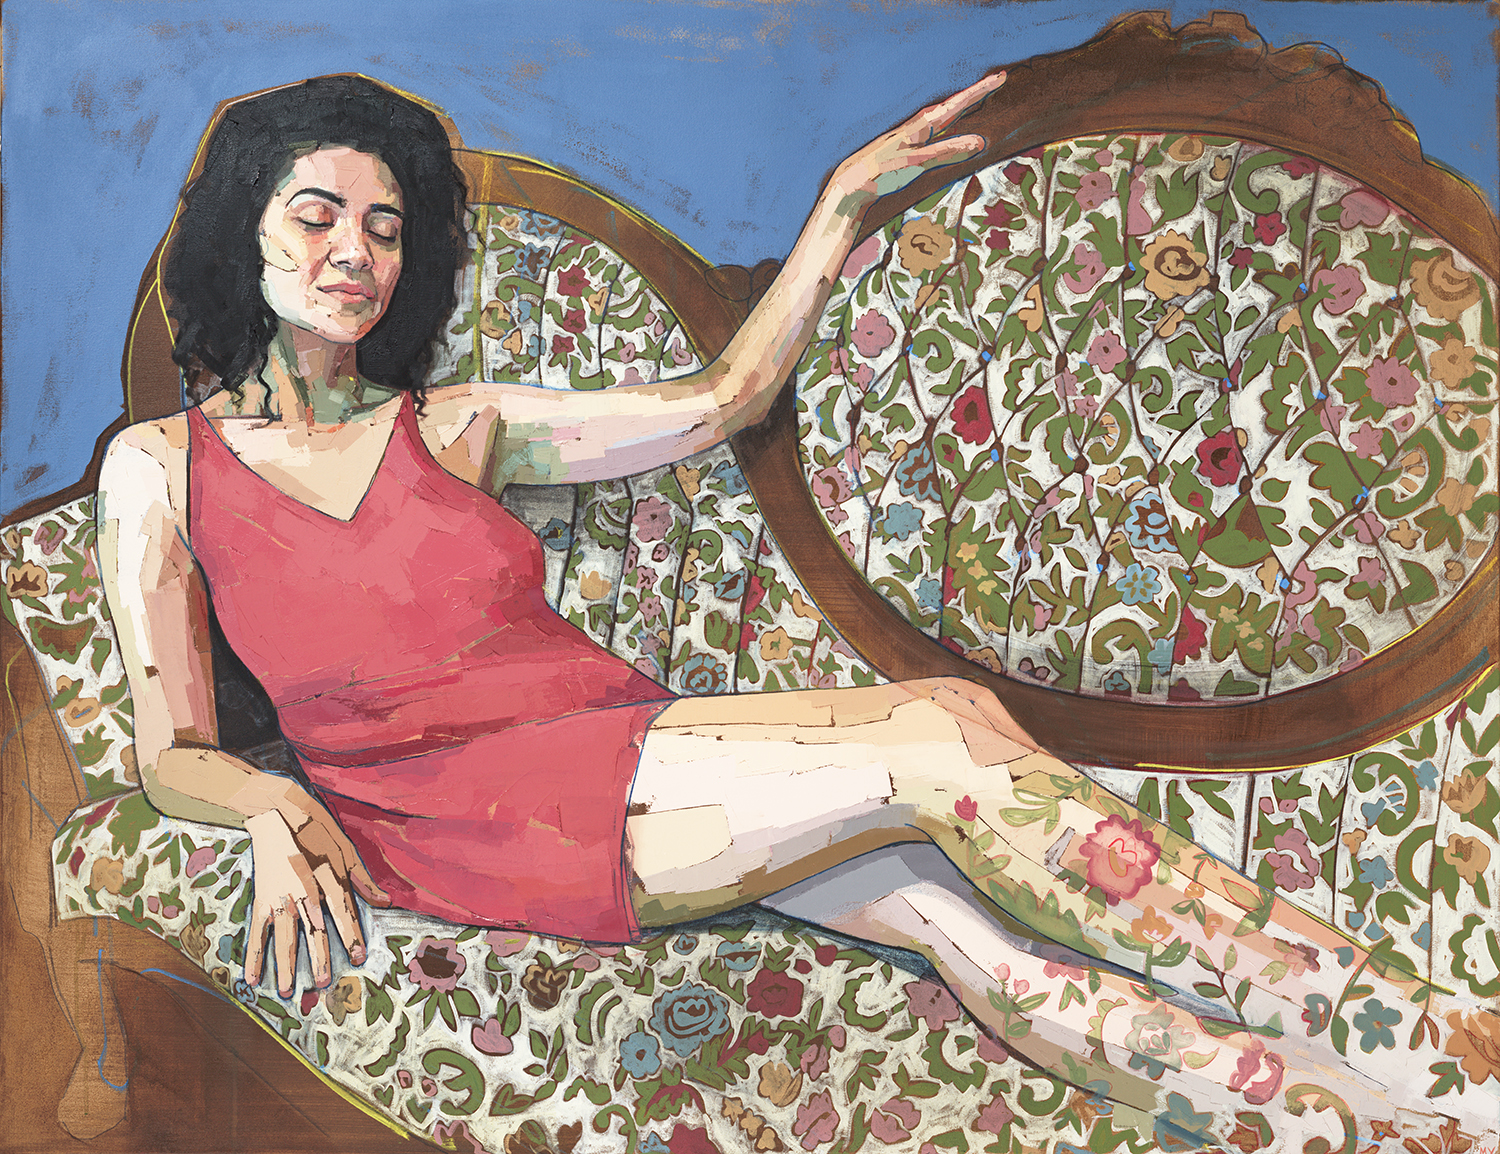 Painting done with wide palette marks of a light skinned woman with short curly black hair reclining on a couch. The couch is ornate with rounded back, wood outlines, and quilted floral pattern cloth. The girl is wearing a pink-red short dress with her eyes closed and her legs are fading into the cloth of the couch.